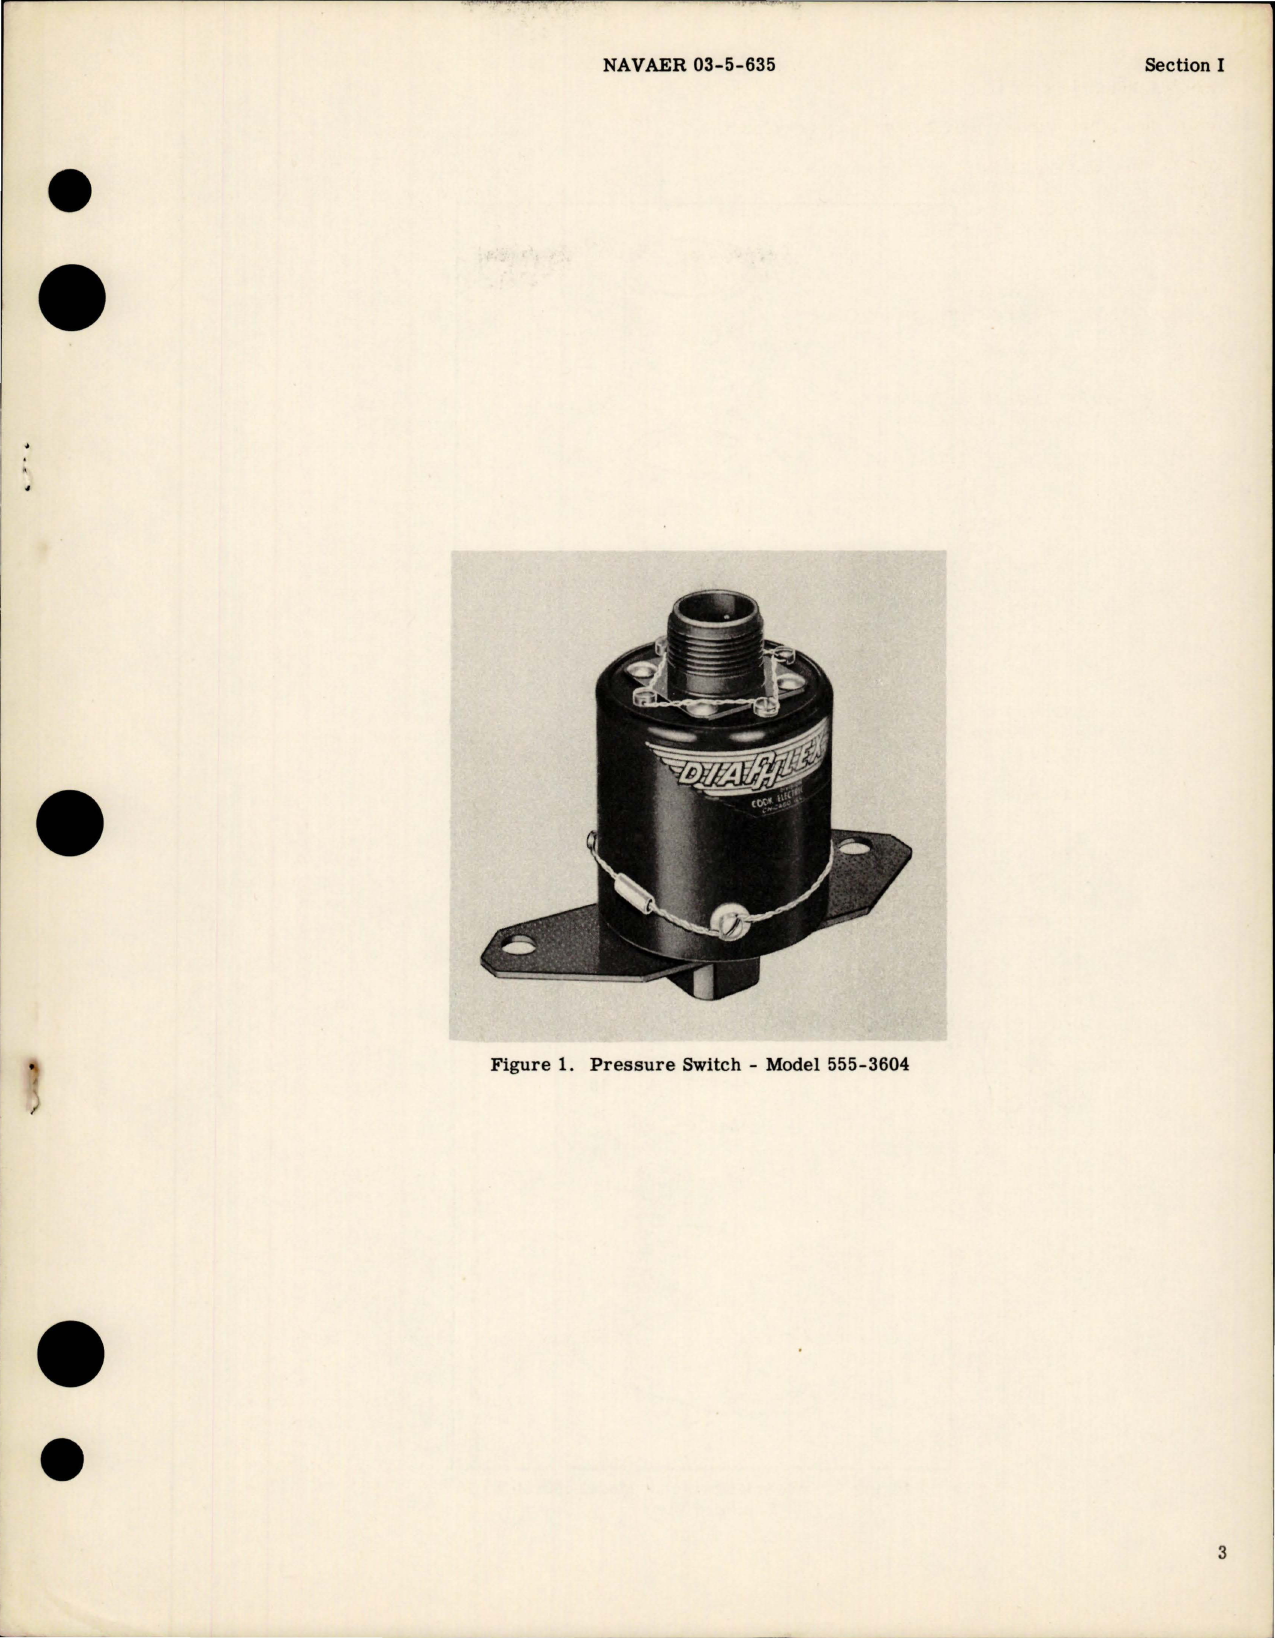 Sample page 5 from AirCorps Library document: Illustrated Parts Breakdown for Pressure Switch - Model 555-3604 